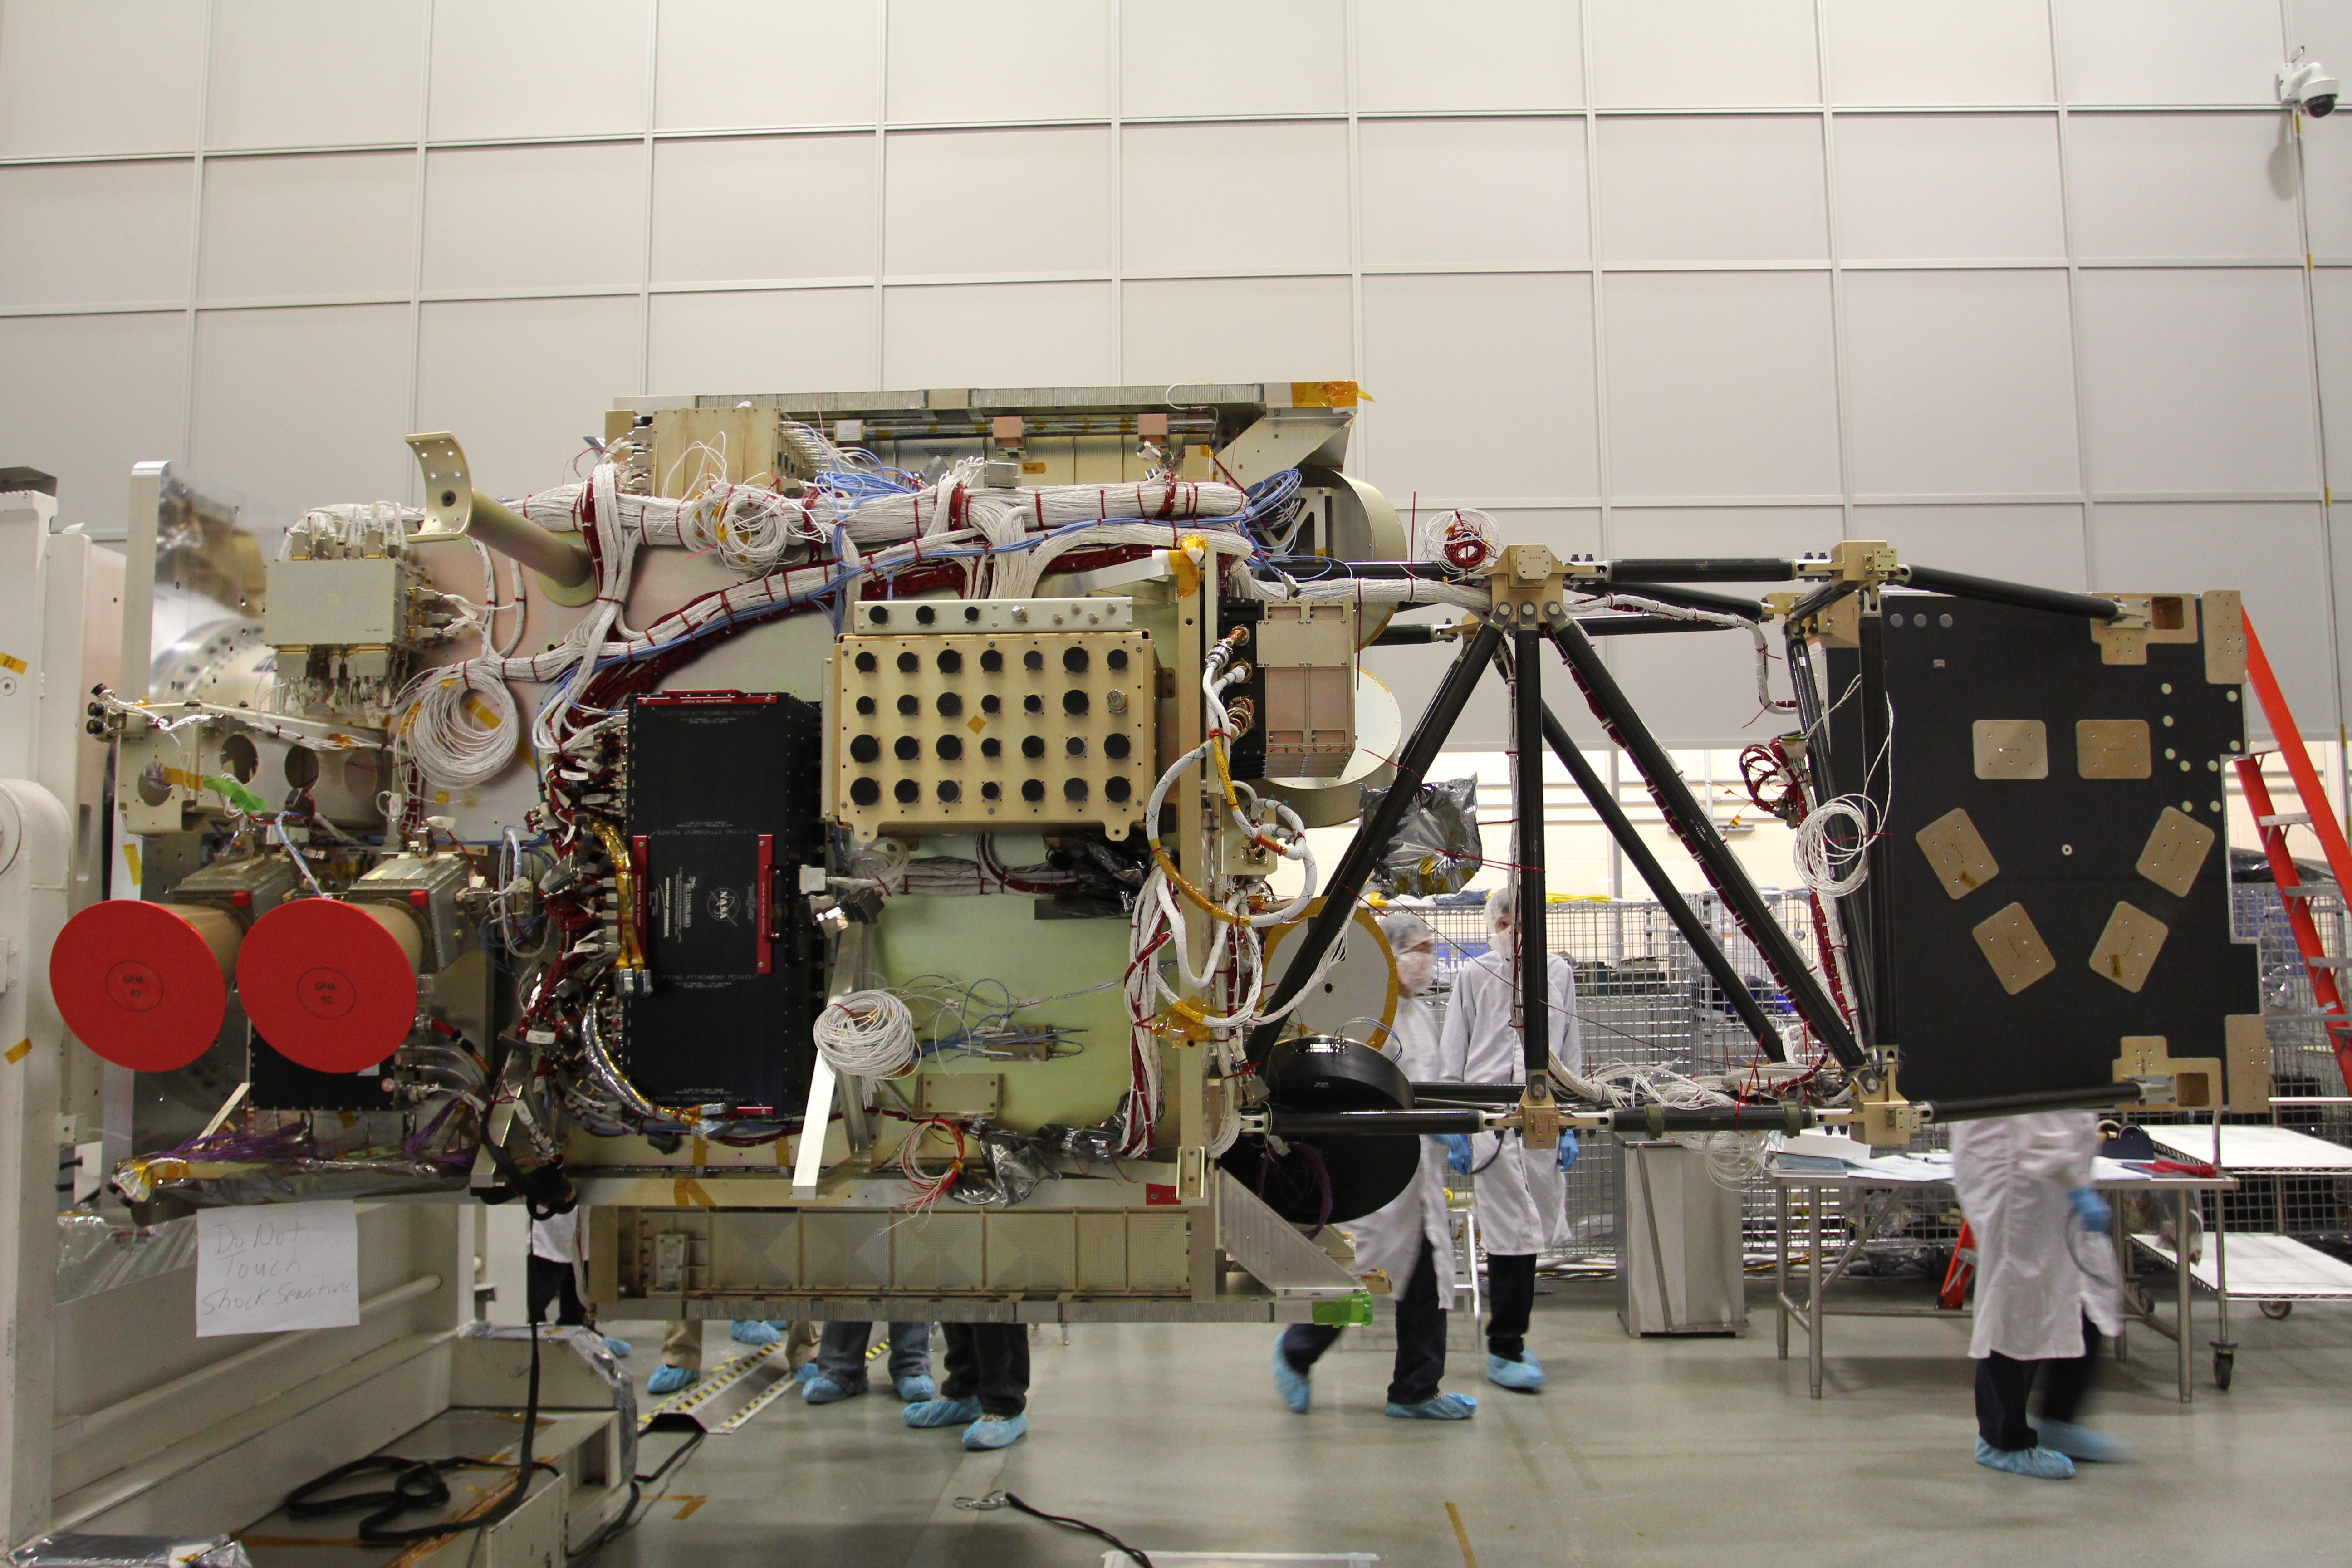 GPM satellite in a cleanroom surrounded by engineers